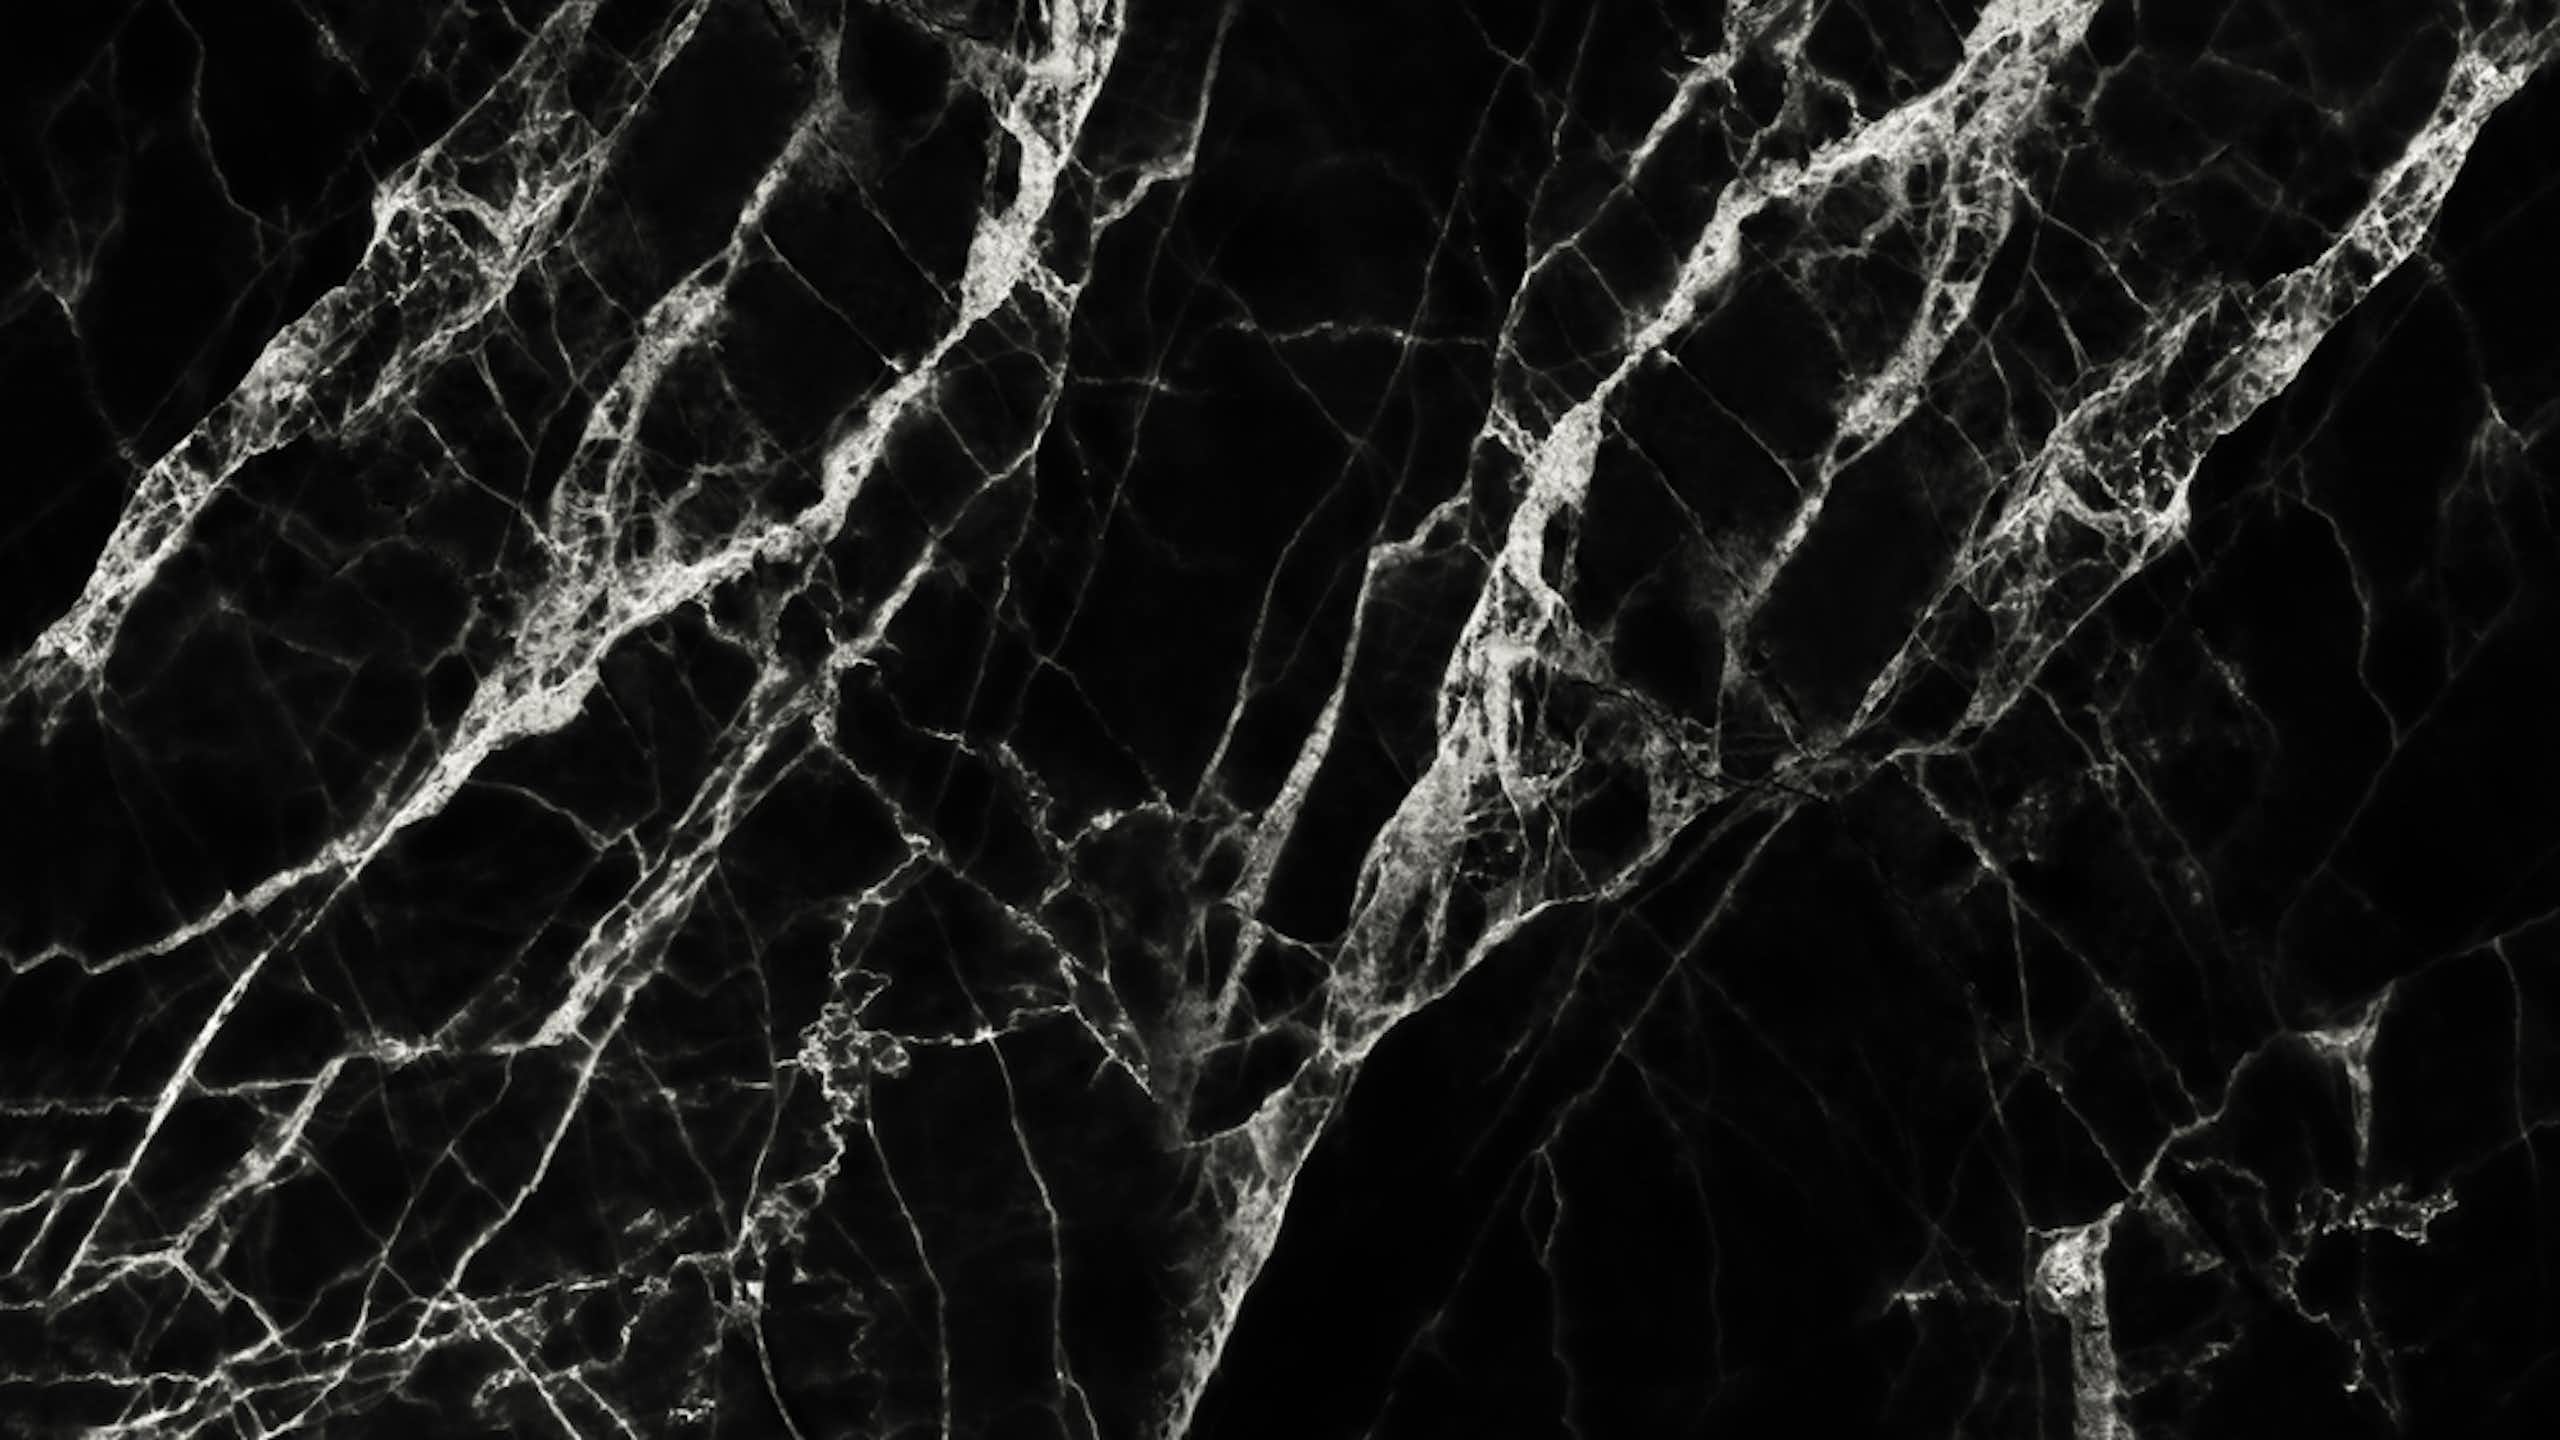 Black marble with white veining